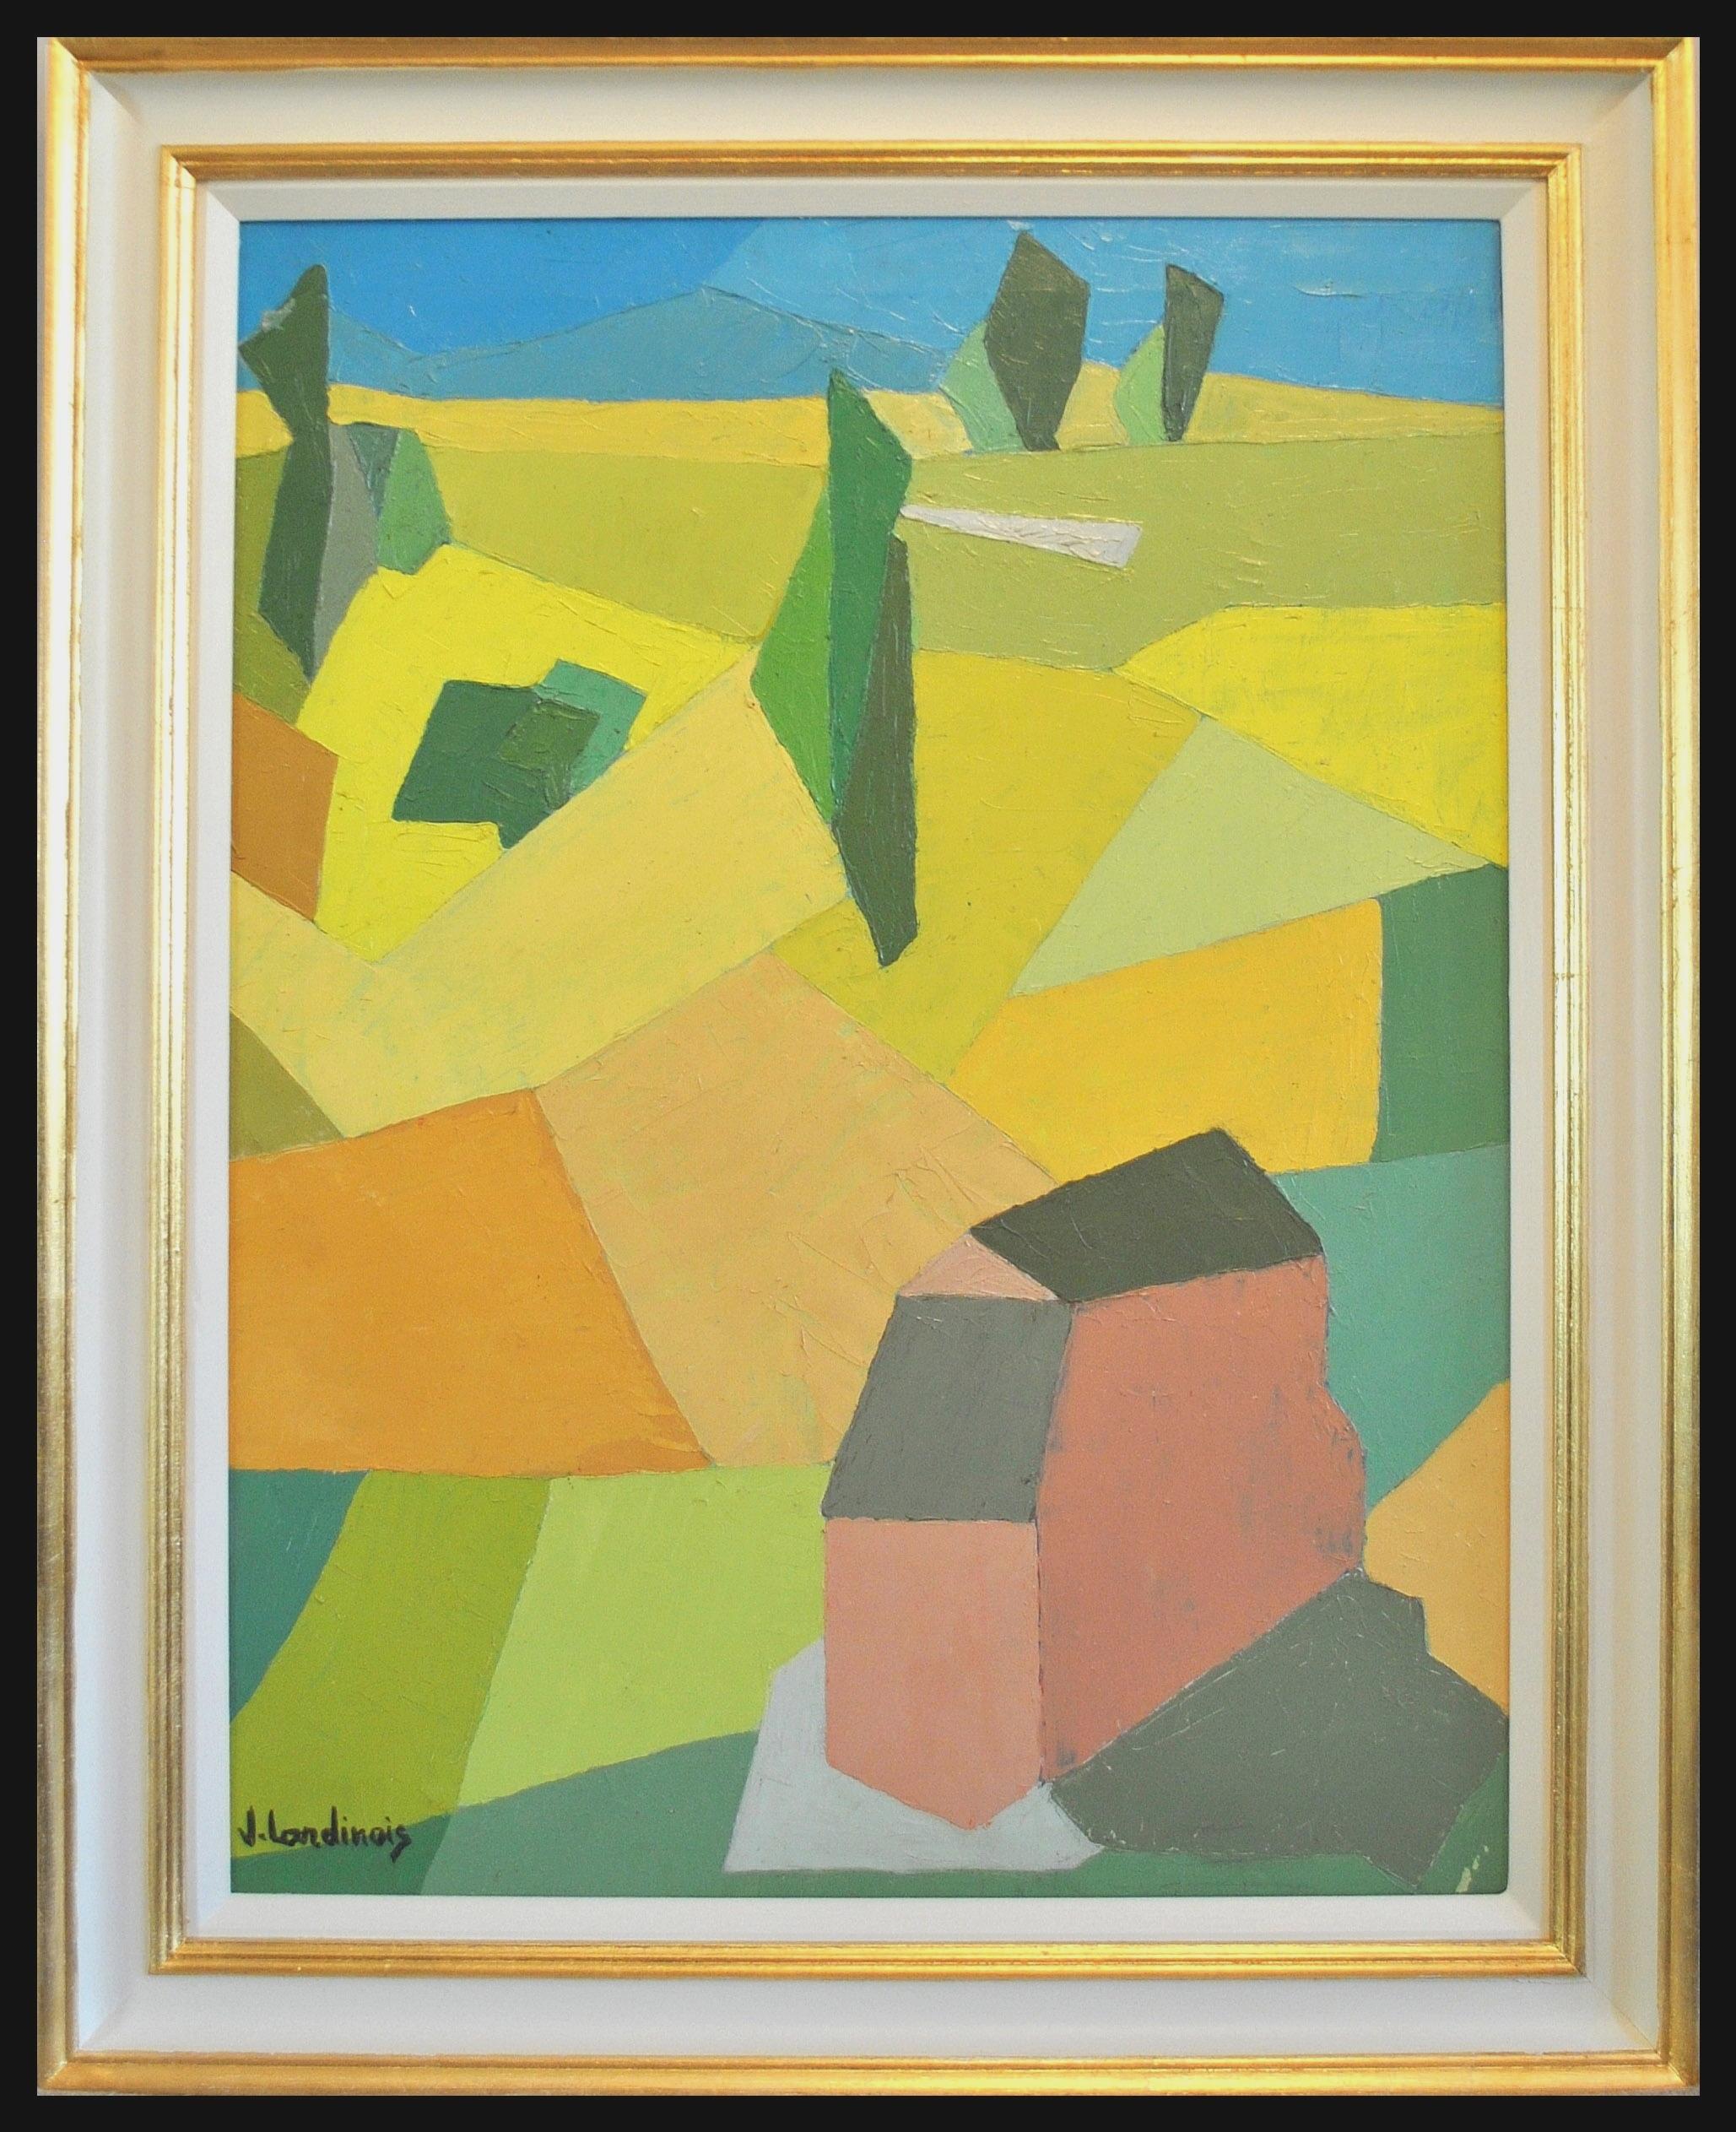 Provence Landscape - Mid 20th Century Cubist South France Oil on Canvas Painting